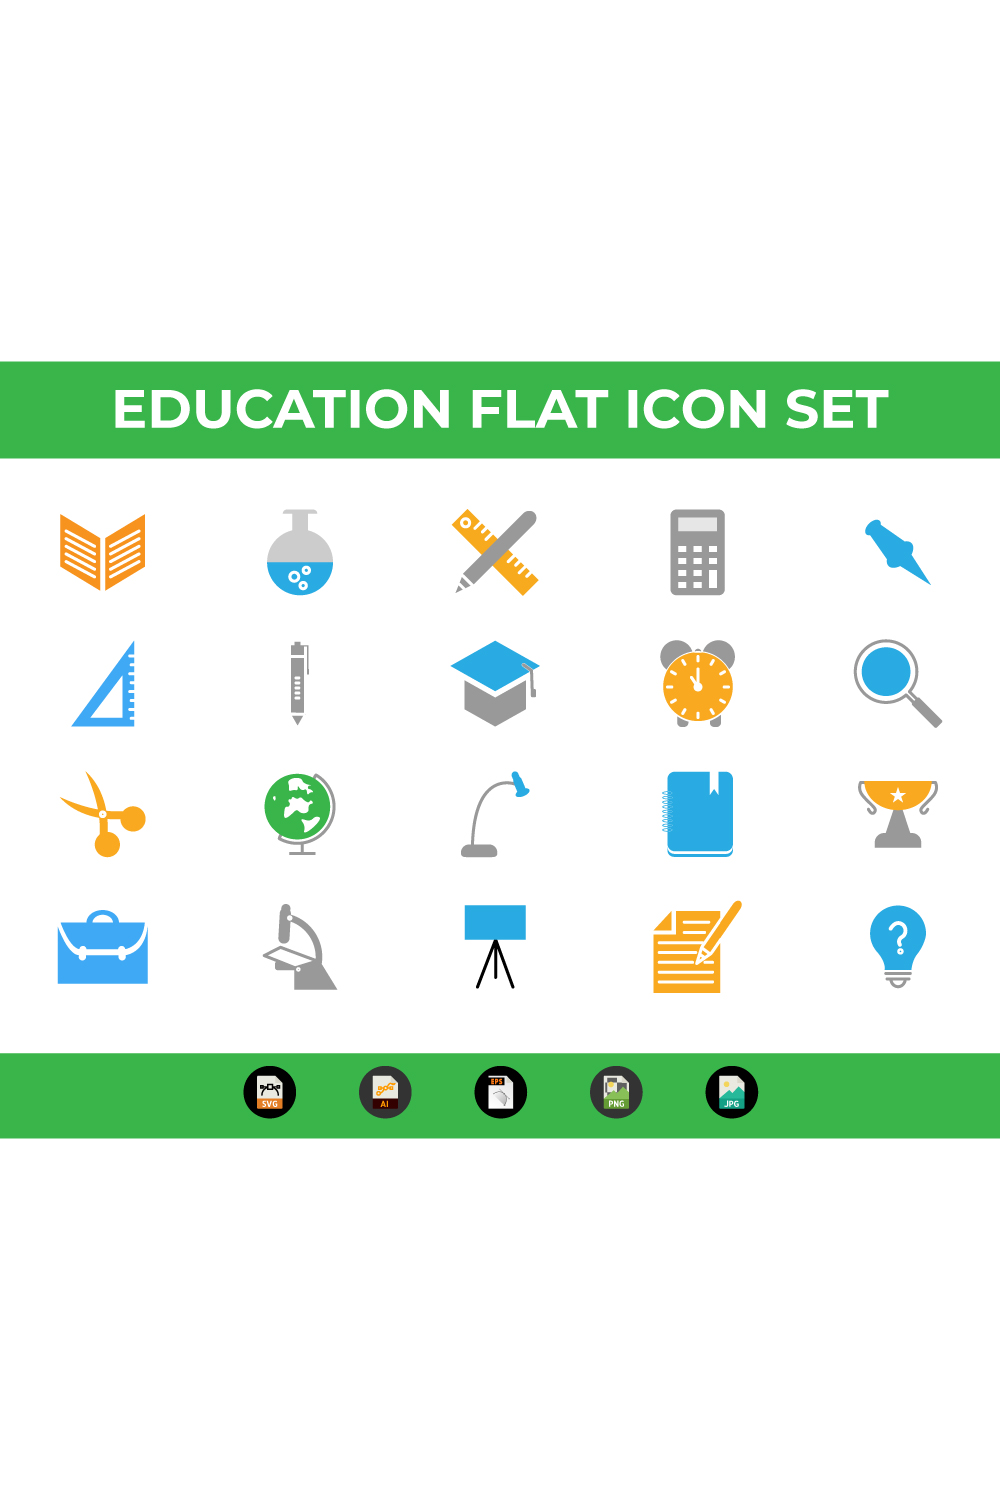 Pinterest images woth education icons set.